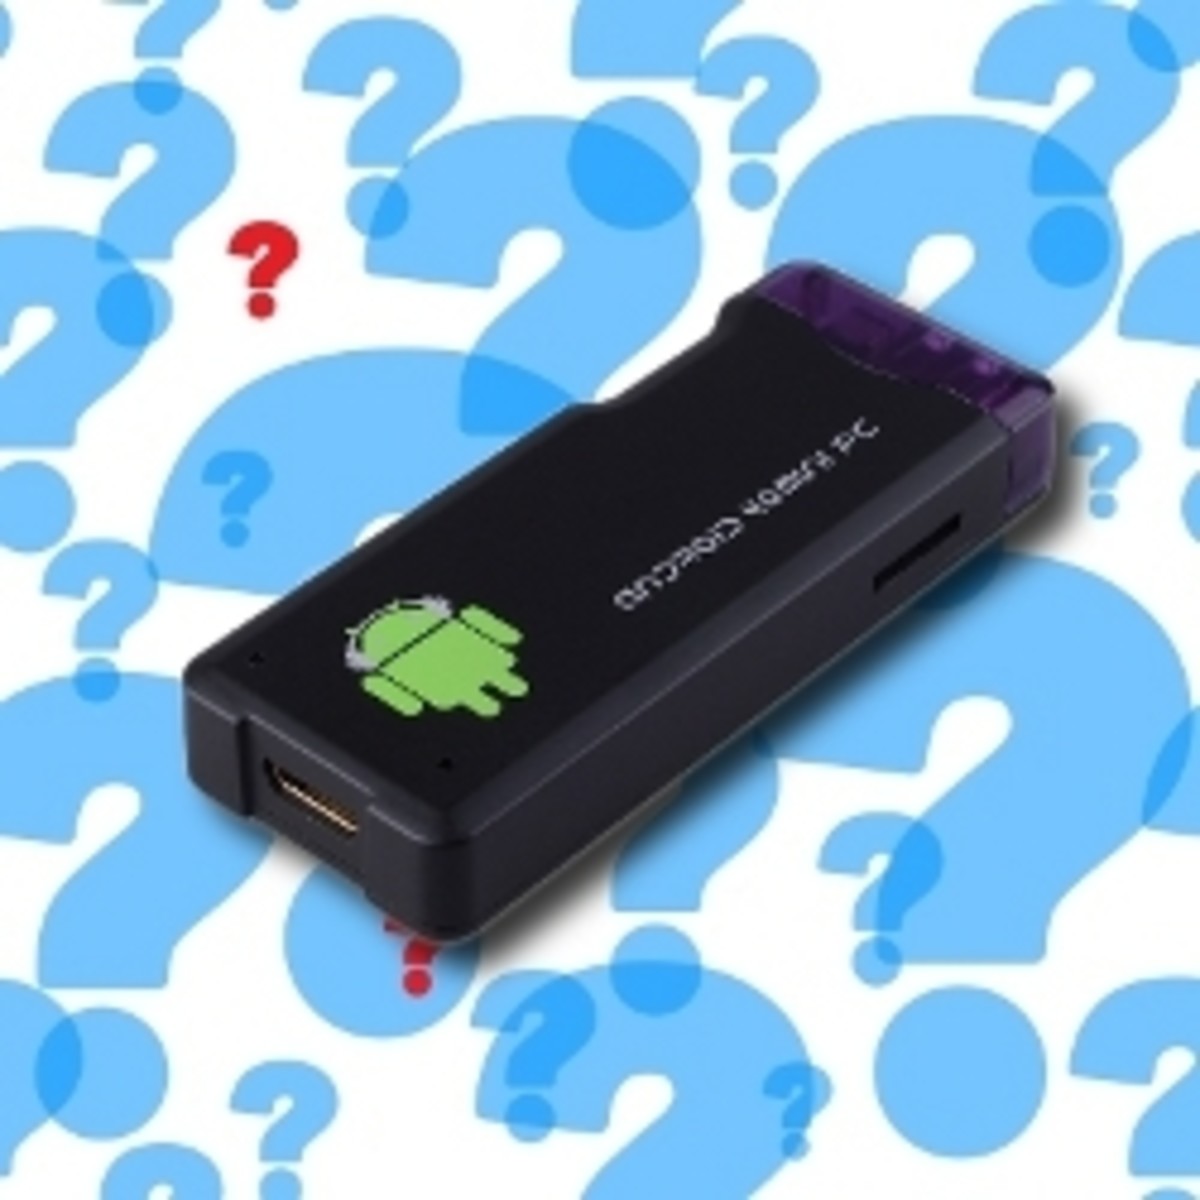 MK802 Android Mini PC Troubleshooting Guide